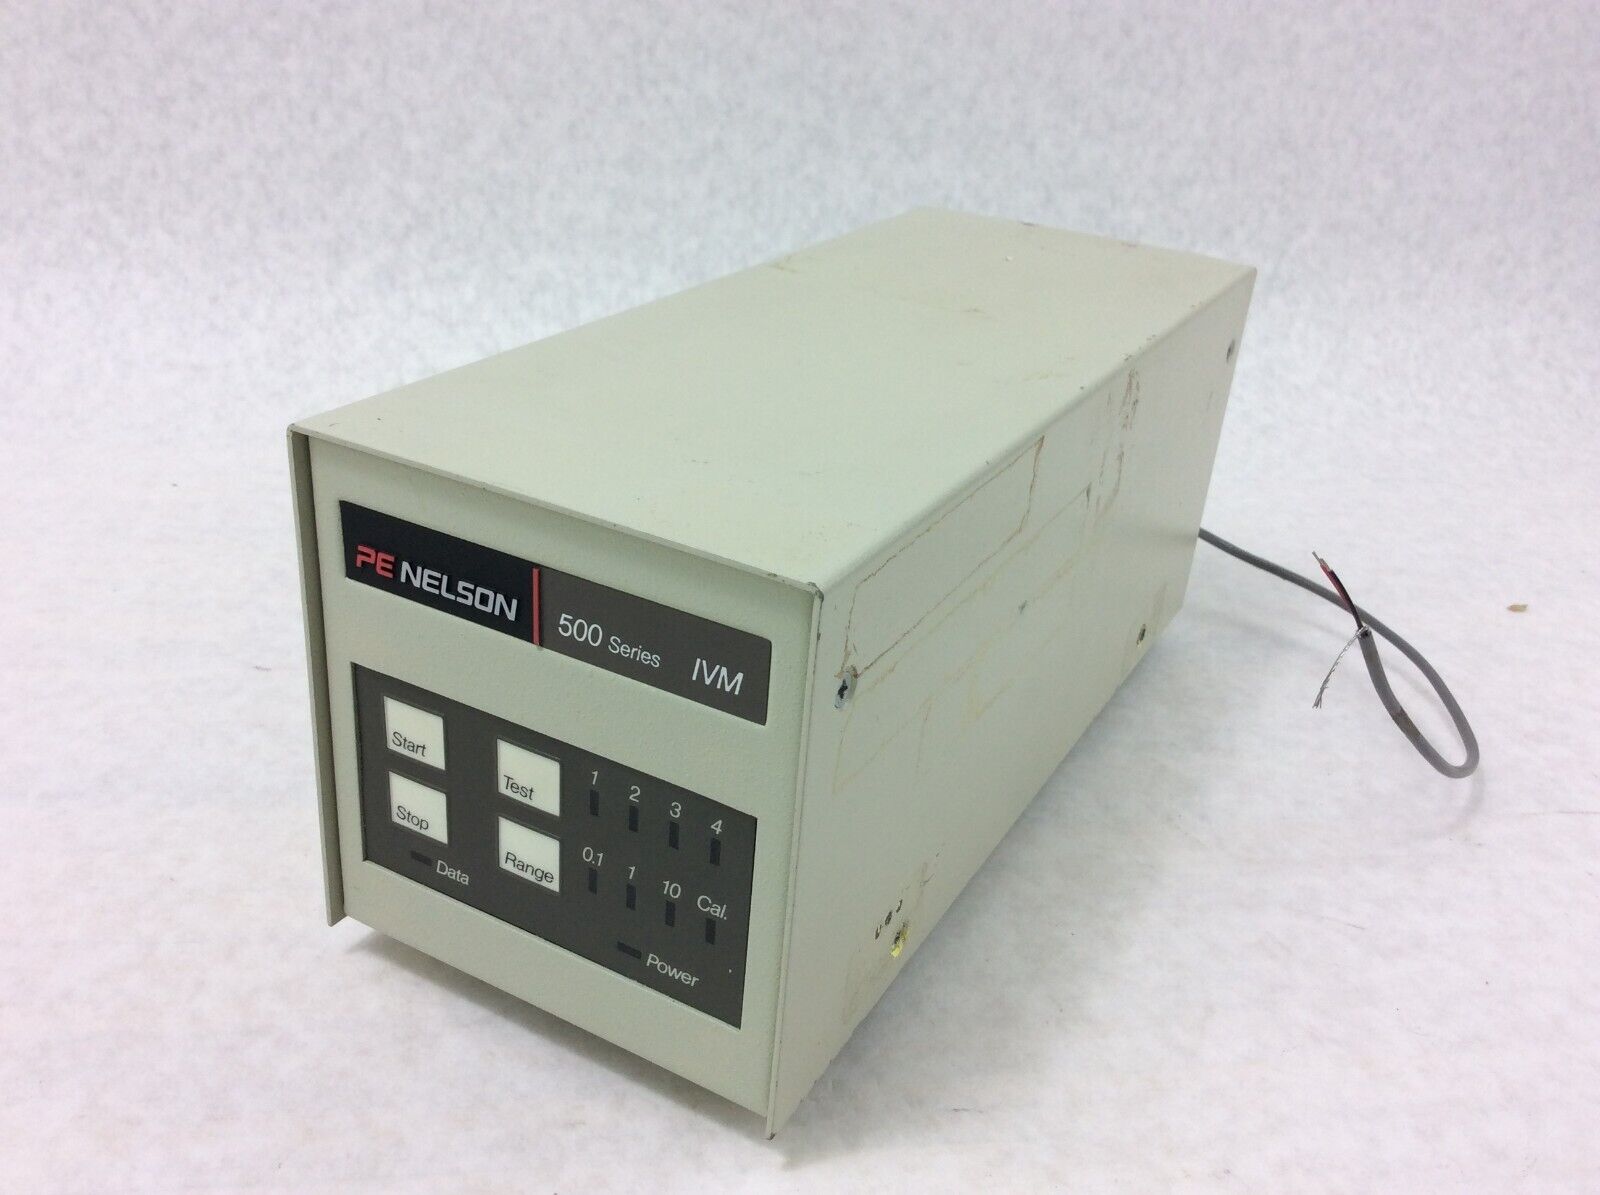 PE Nelson Model 500 Series IVM Analytical Unit